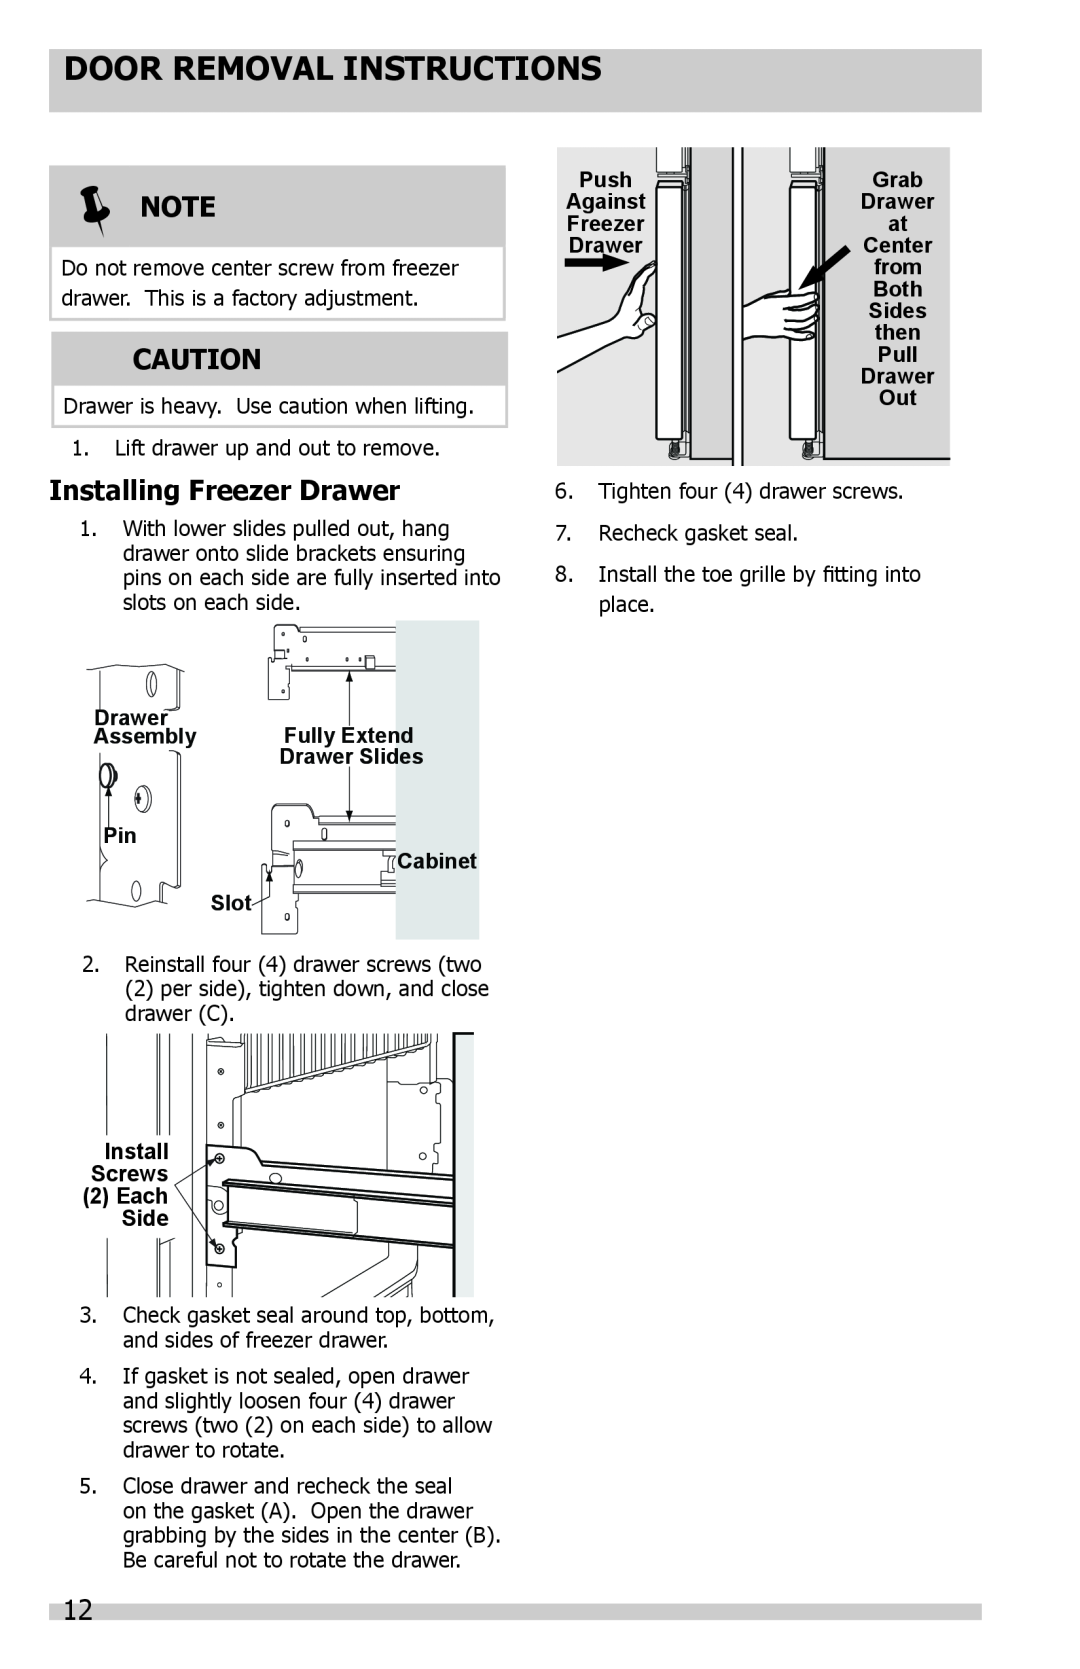 Frigidaire FGHF2344MF, FGHB2844LP, FGHB2869LF, FGHB2844LE Installing Freezer Drawer, Door Removal Instructions,  Note 